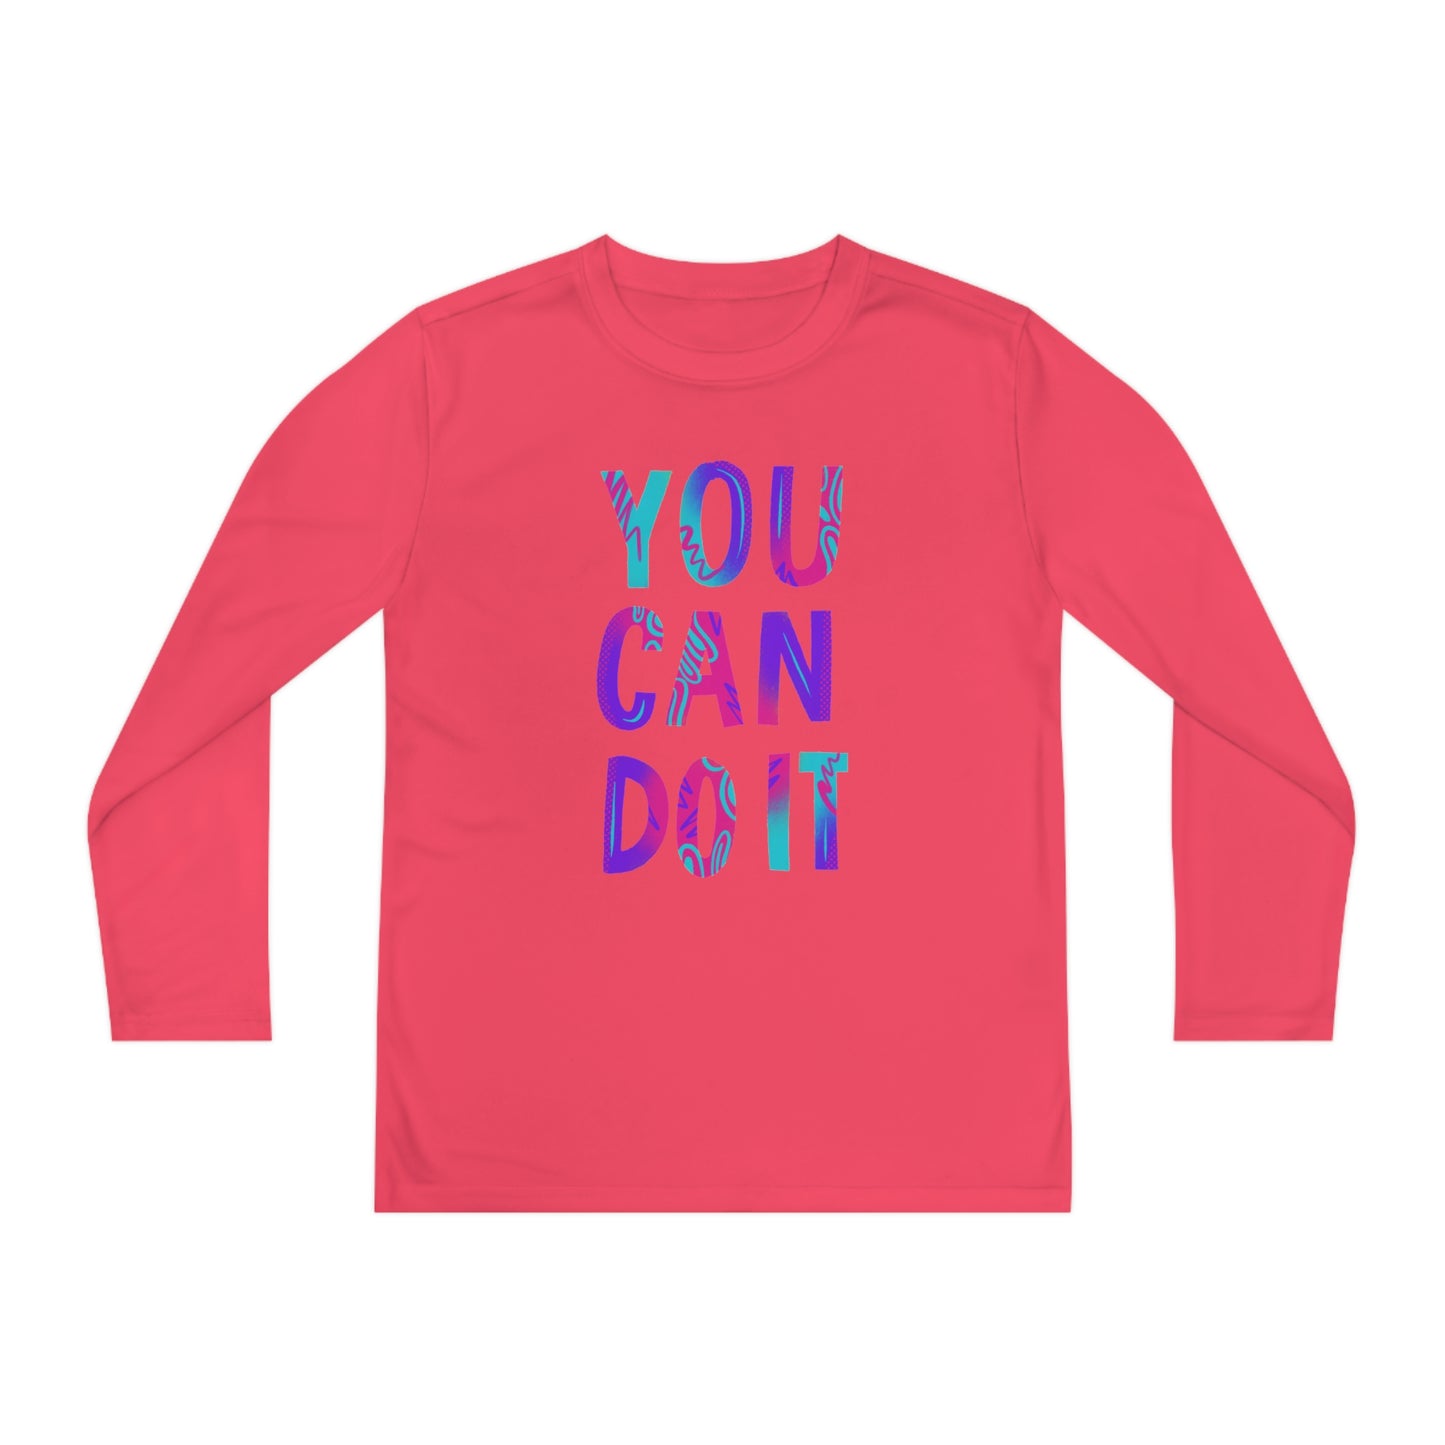 Niccie's Performance-Enhancing Youth Long Sleeve Competitor Tee